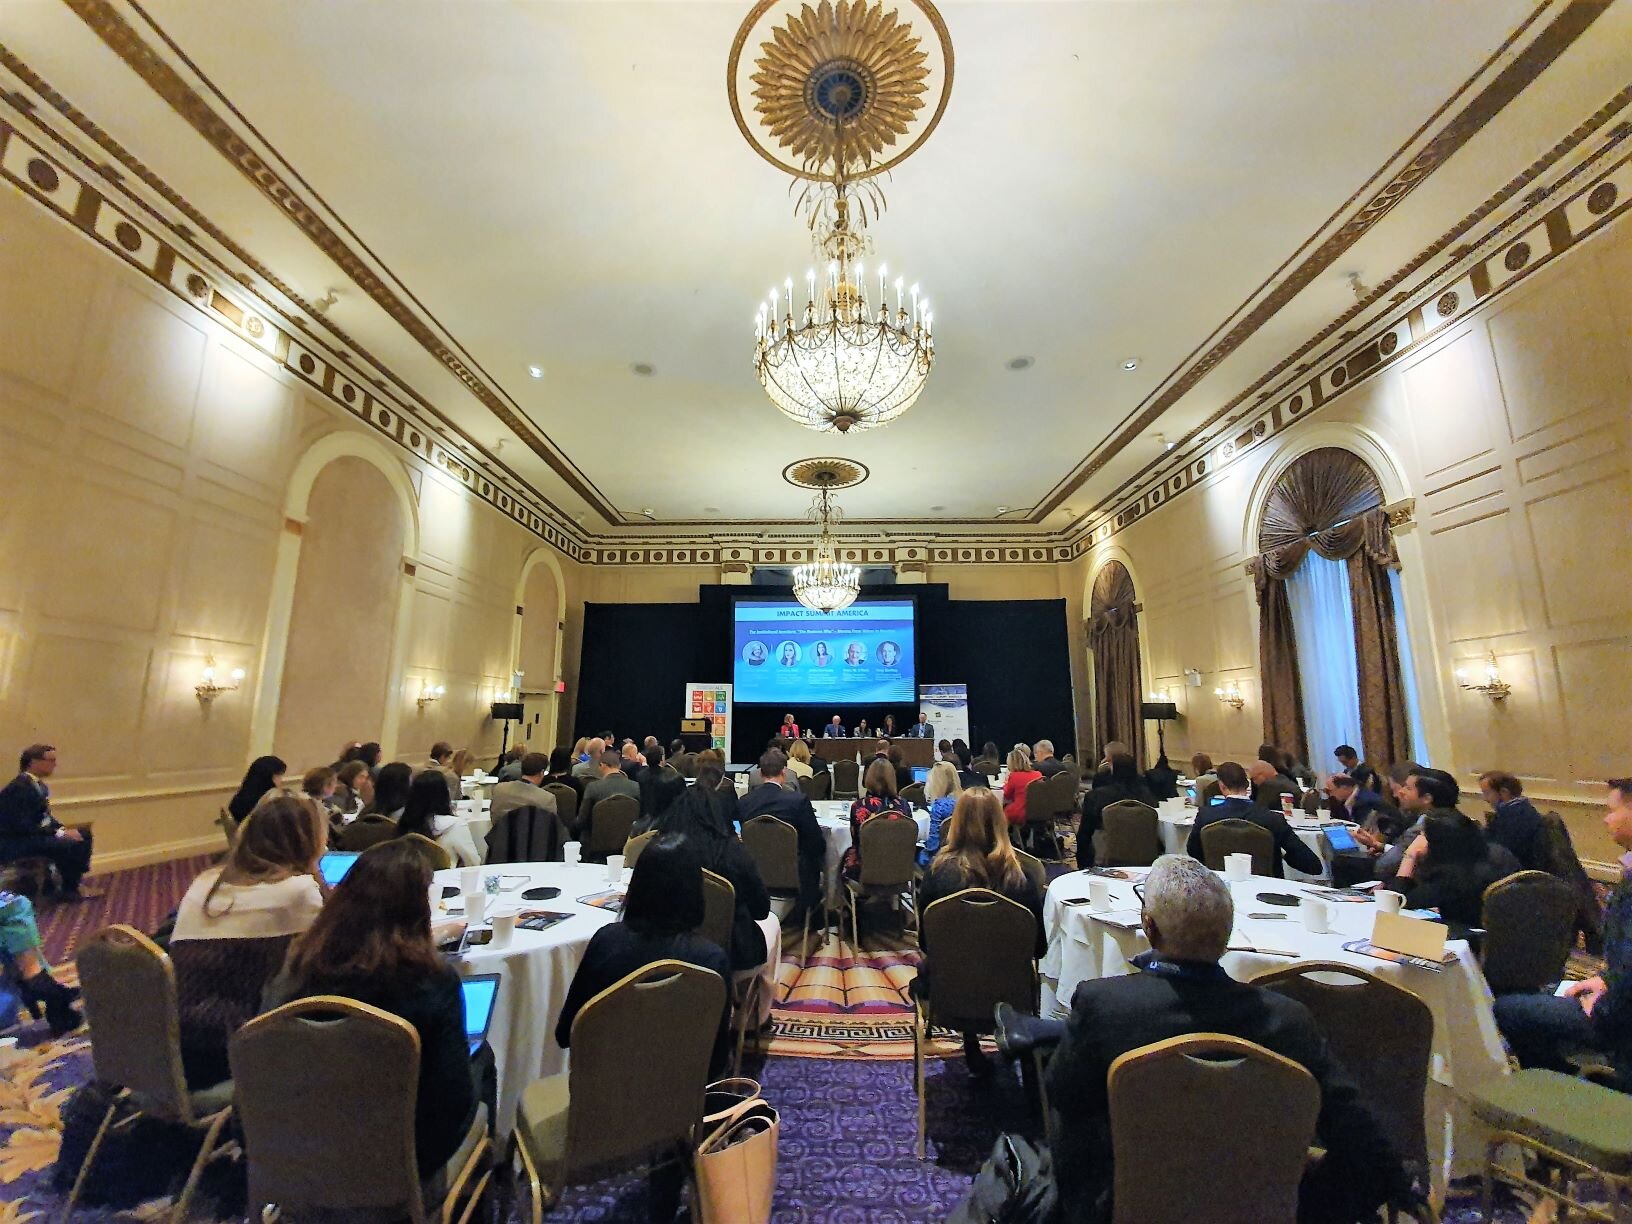 PRESS RELEASE Beyond ESG- Highlights from Impact Summit America 2019